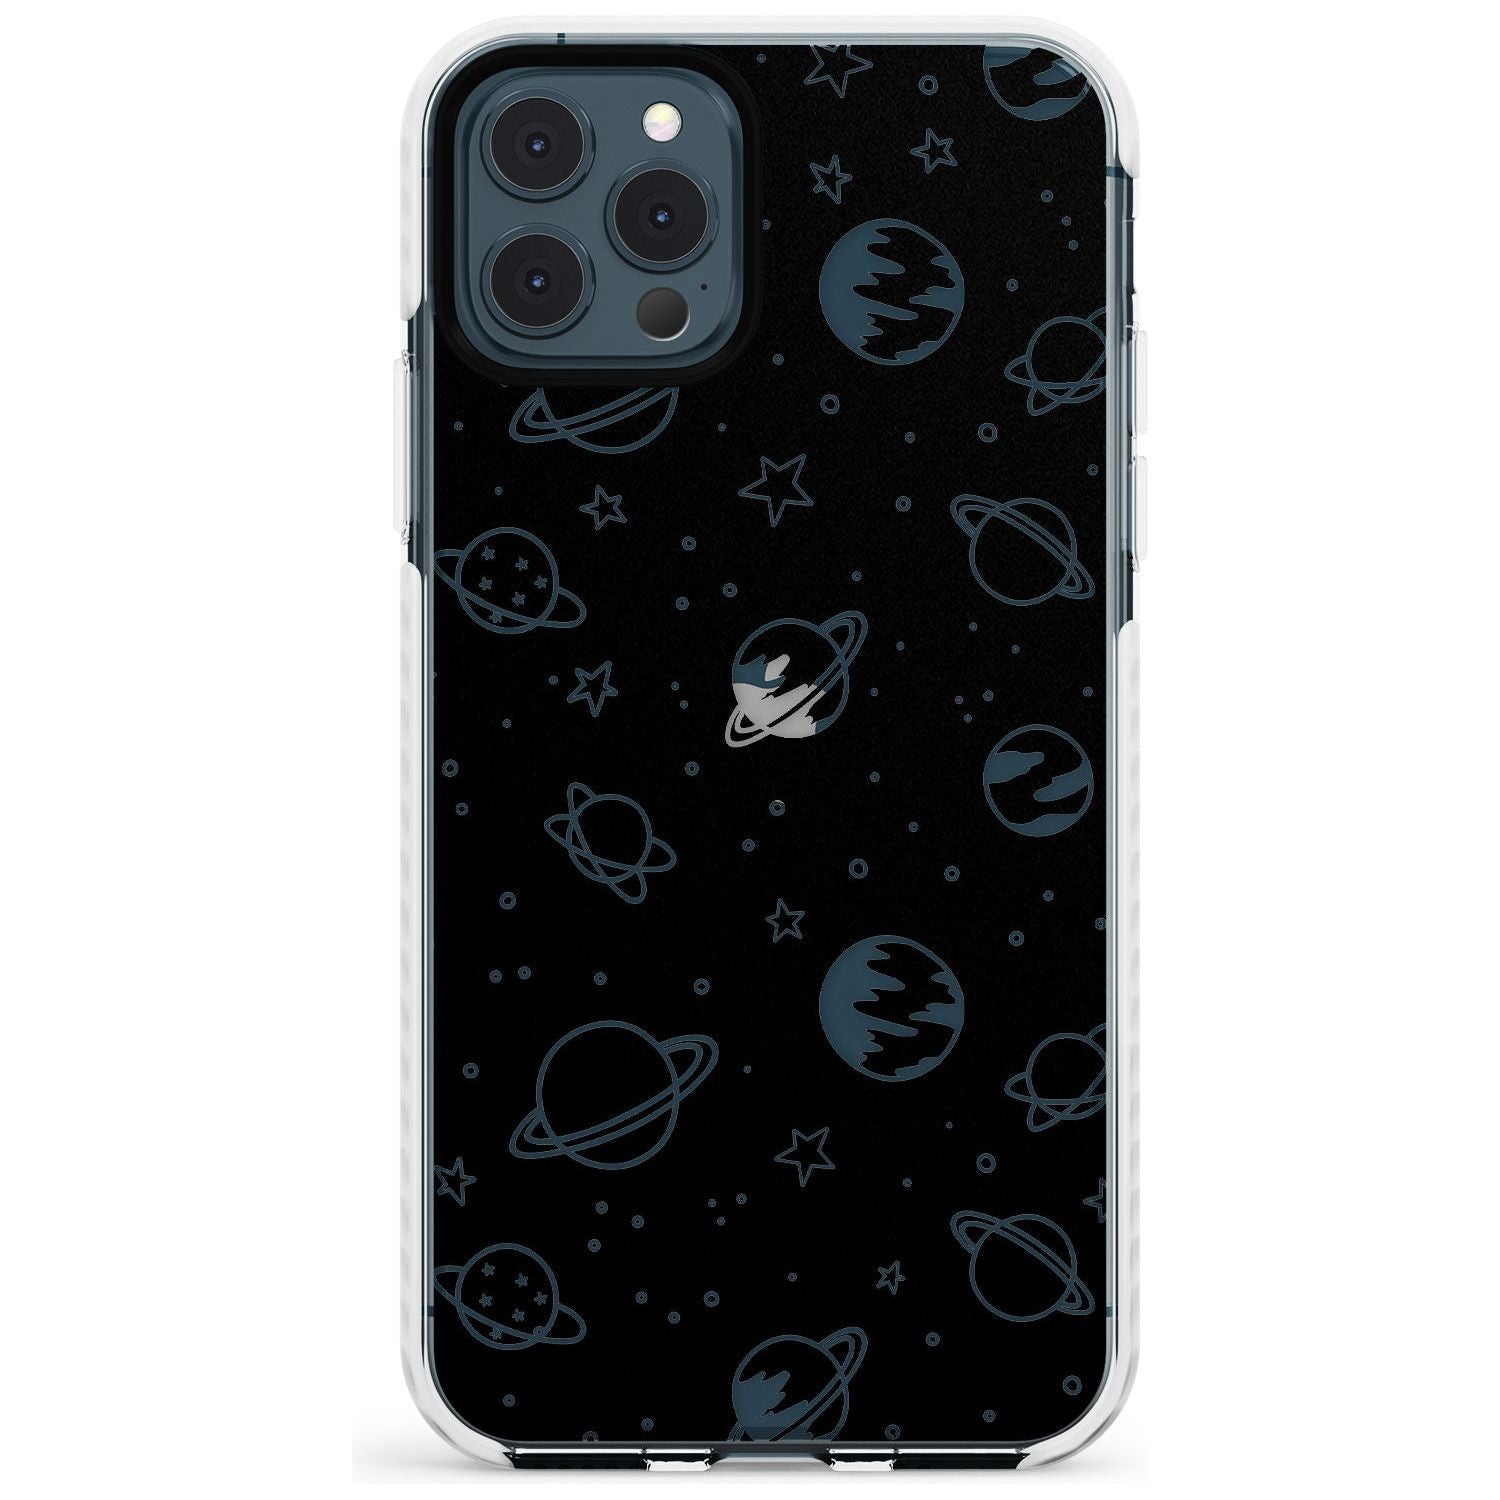 Outer Space Outlines: Clear on Black Slim TPU Phone Case for iPhone 11 Pro Max